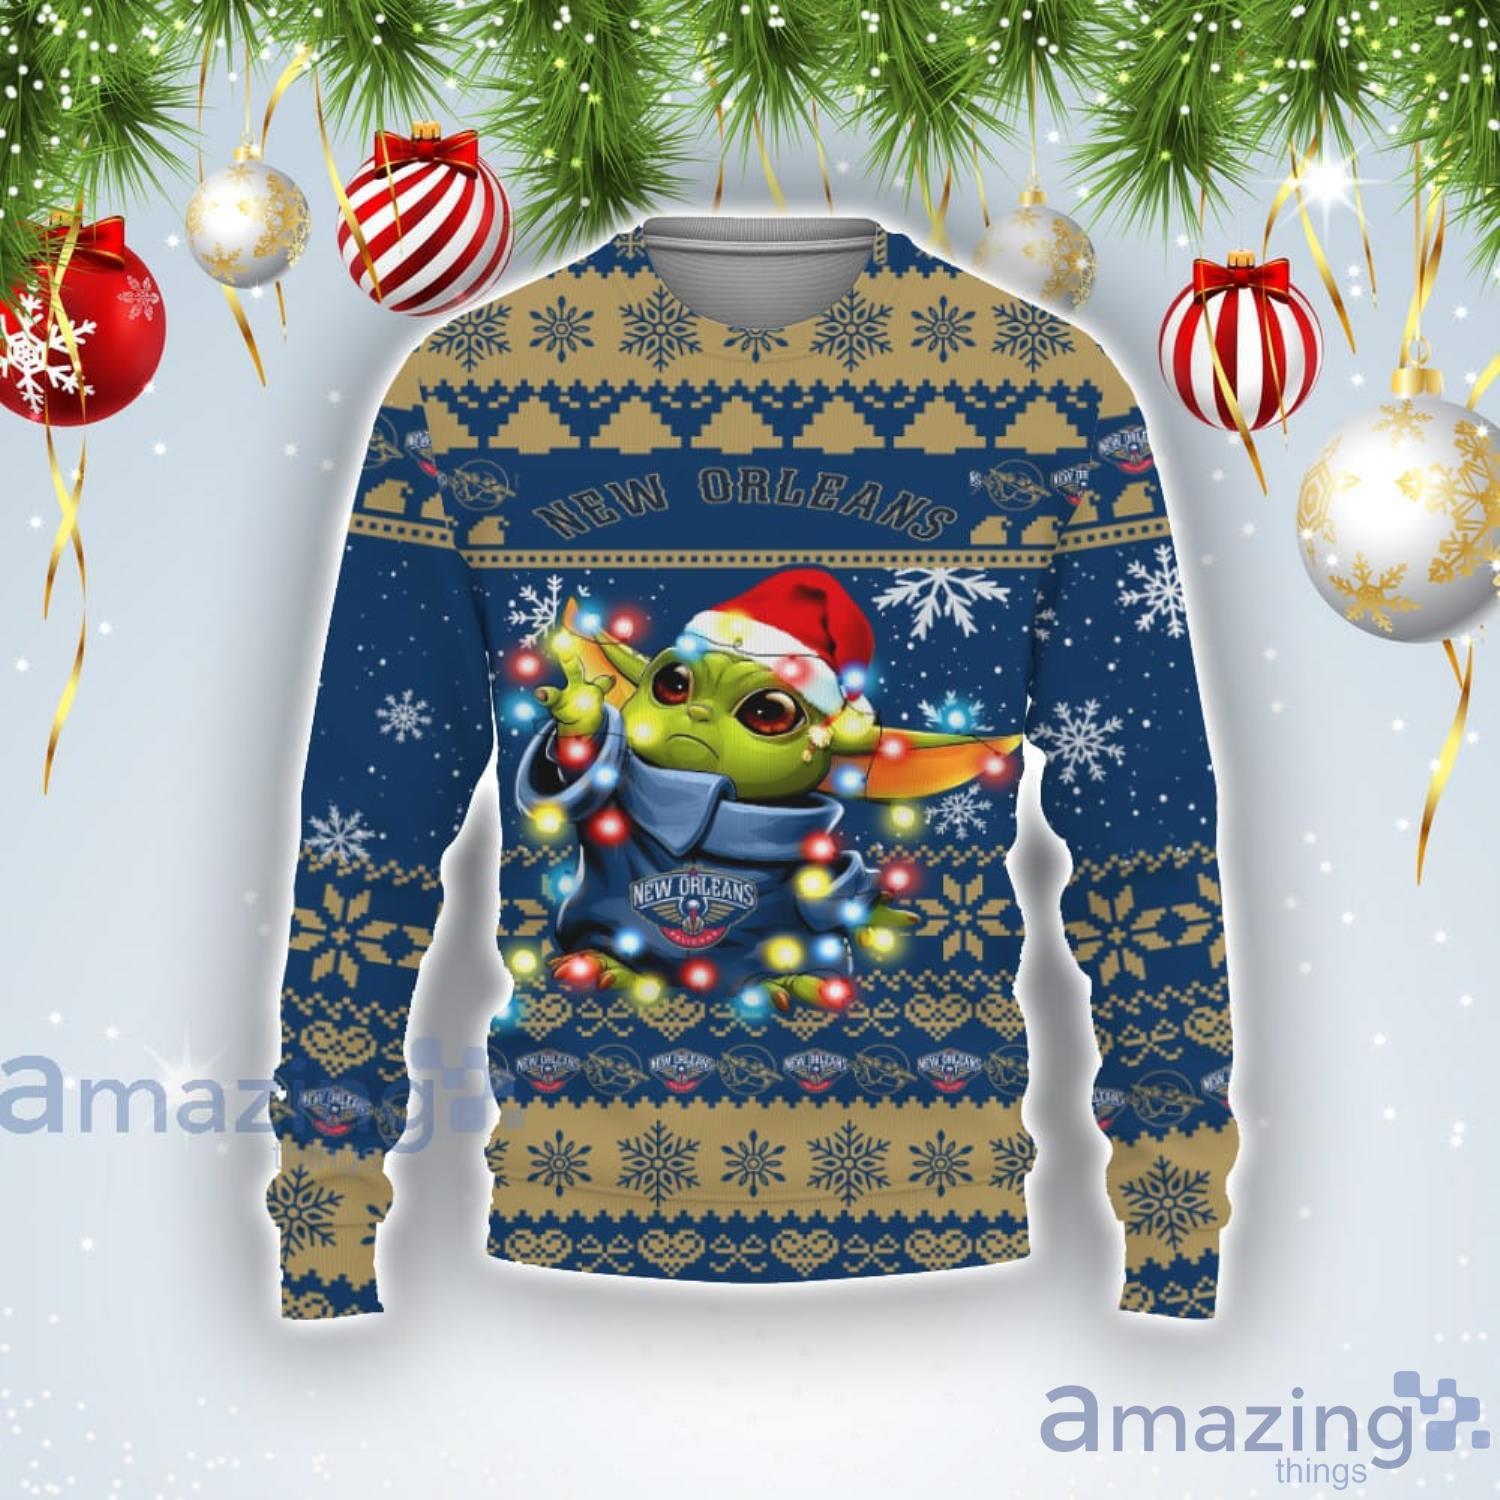 New Orlean Pelicans Baby Yoda Star Wars Sports Football American Ugly Christmas Sweater Product Photo 1